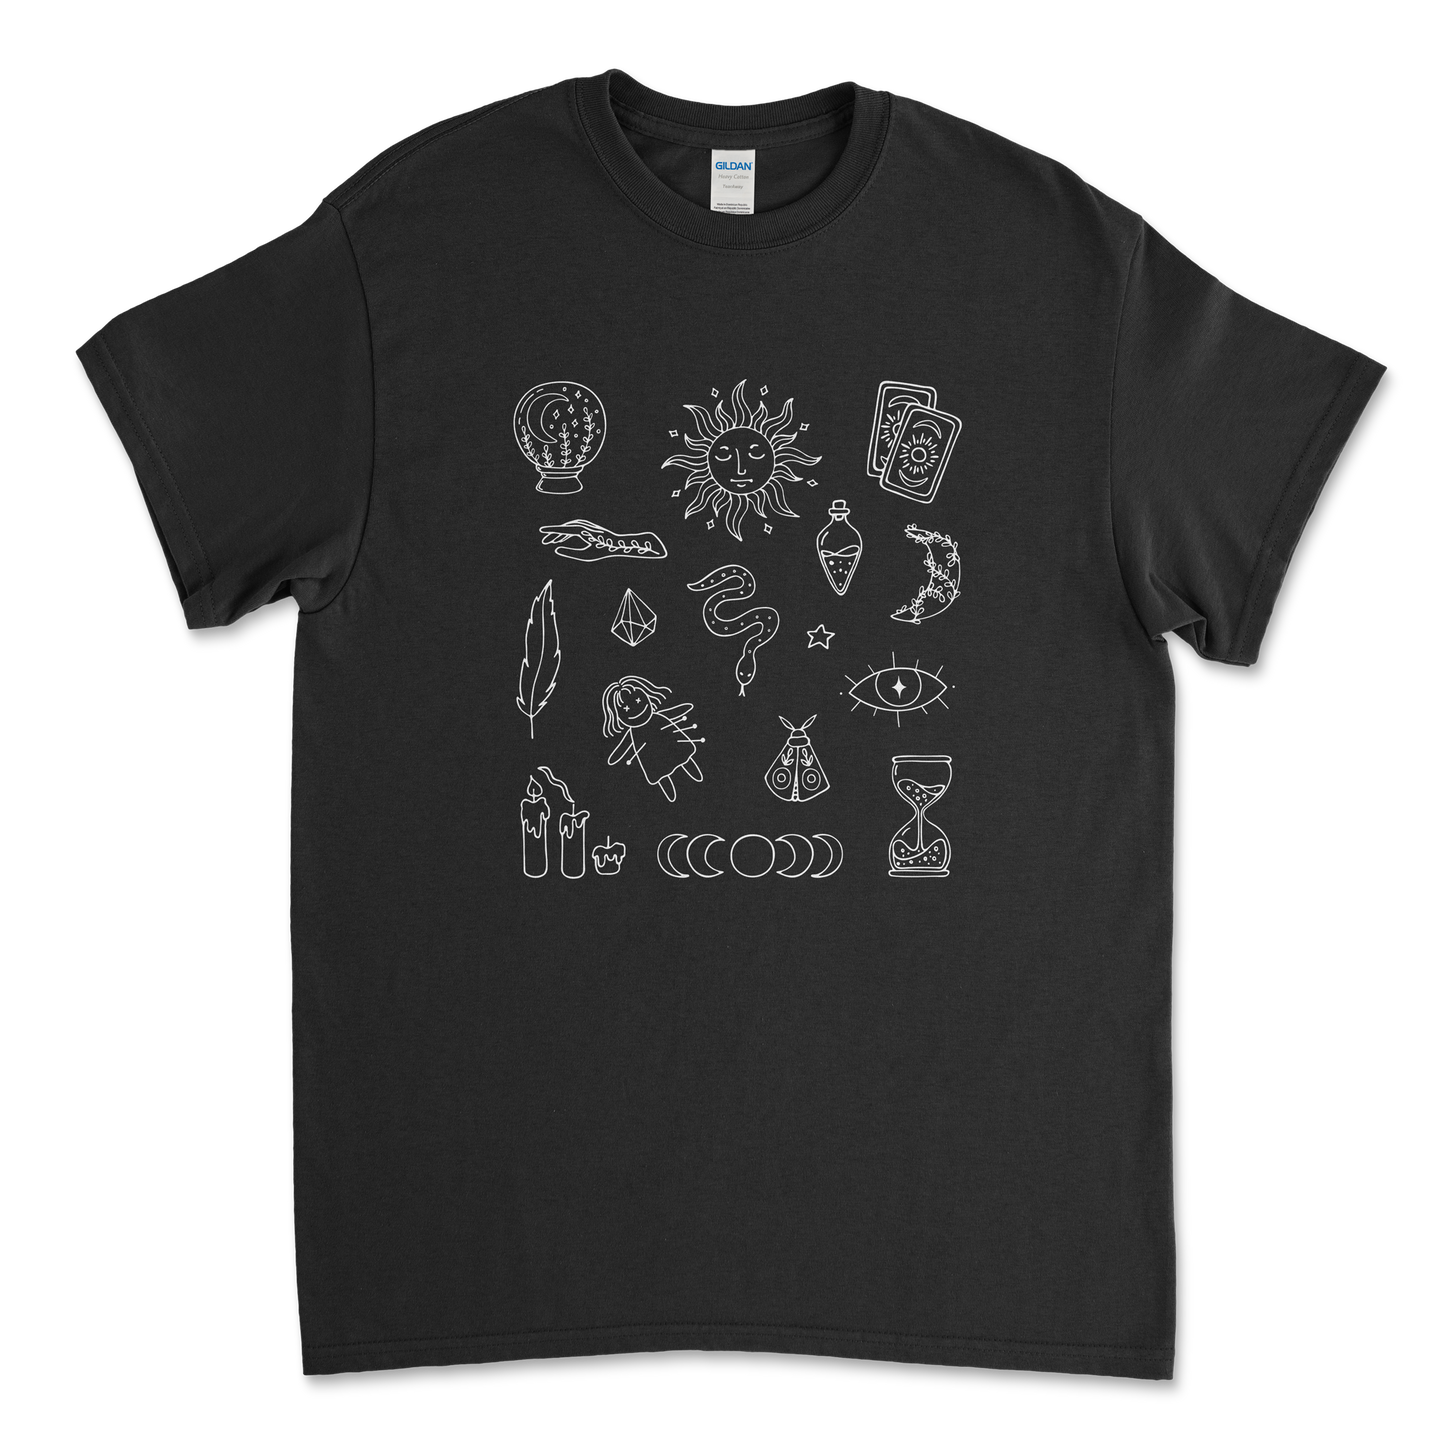 Witchy Doodles T-Shirt